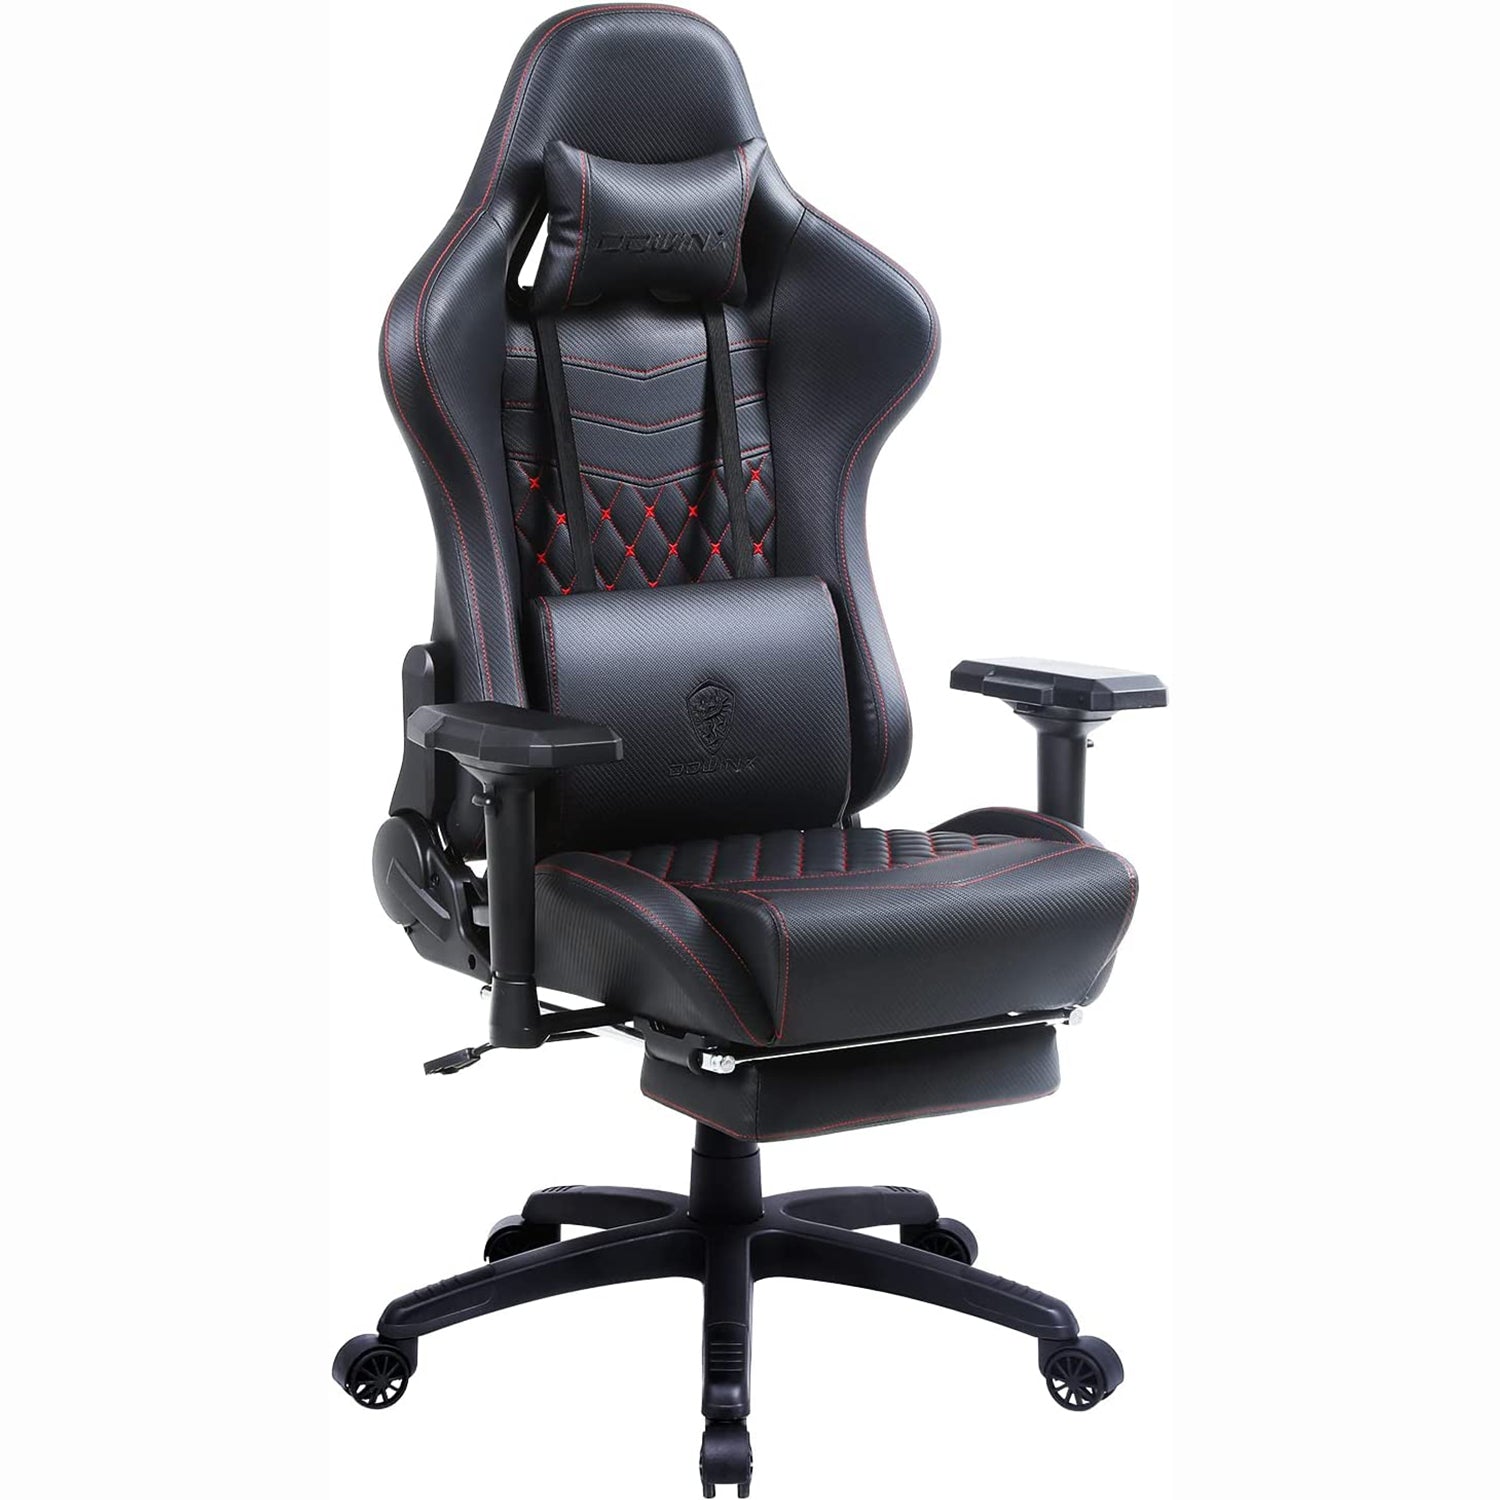 Dowinx 6689S Gaming Office Chair Ergonomic Racing Style-BLACK